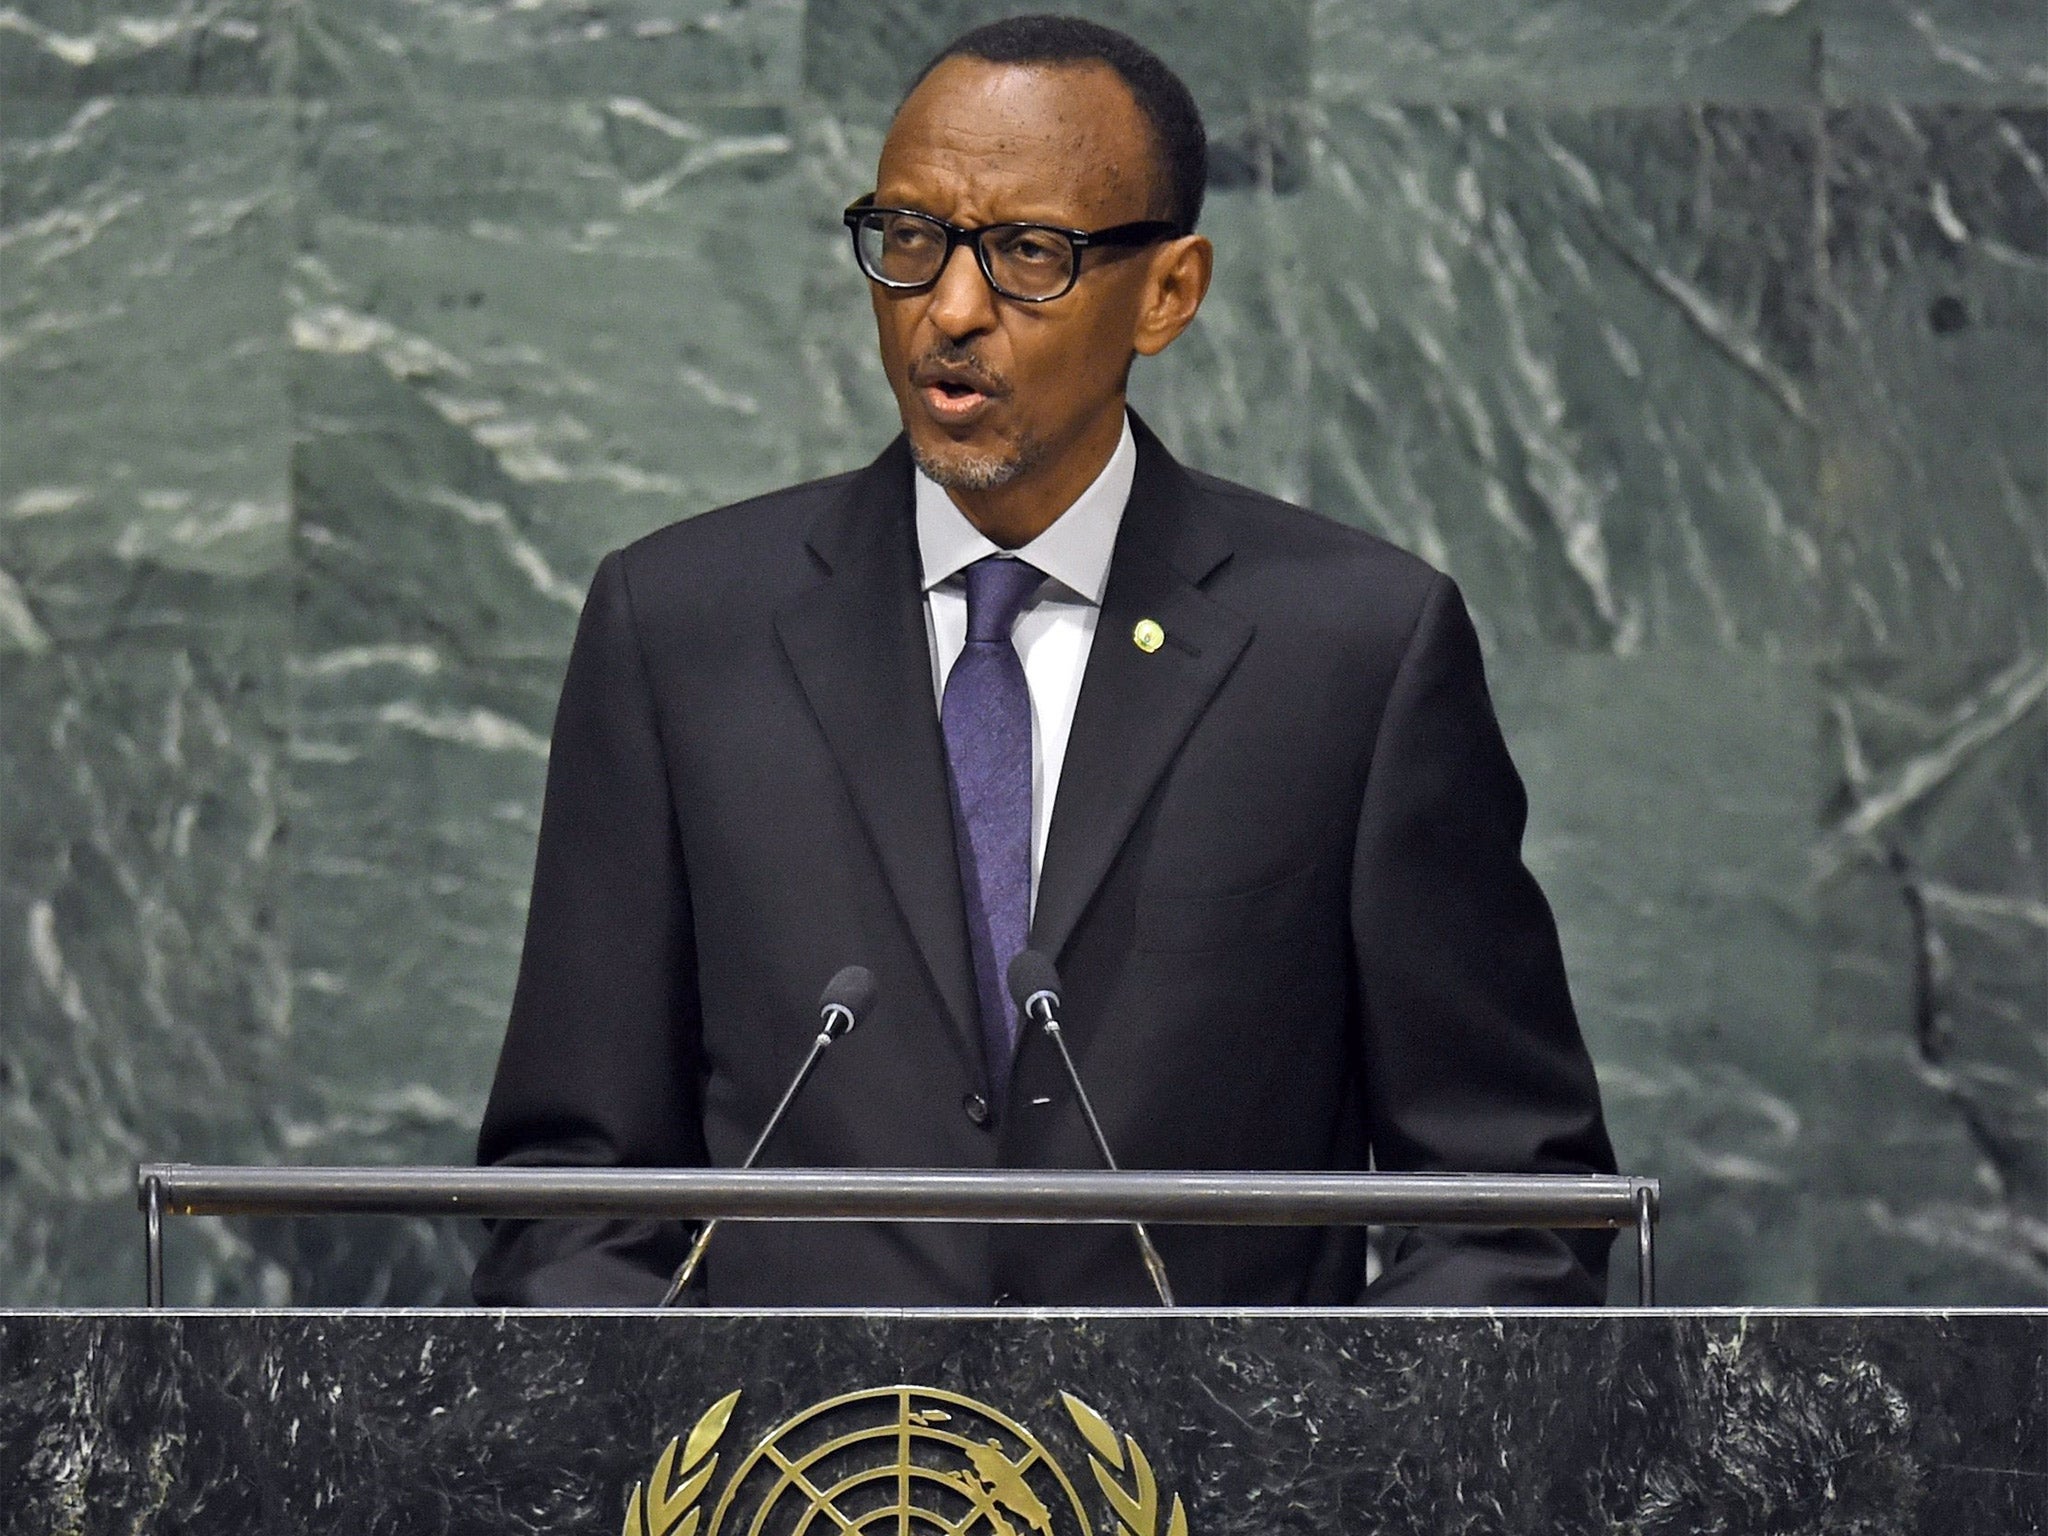 The Rwandan President, Paul Kagame, will be eligible for a third term if the referendum on the abolition of term limits is passed by voters